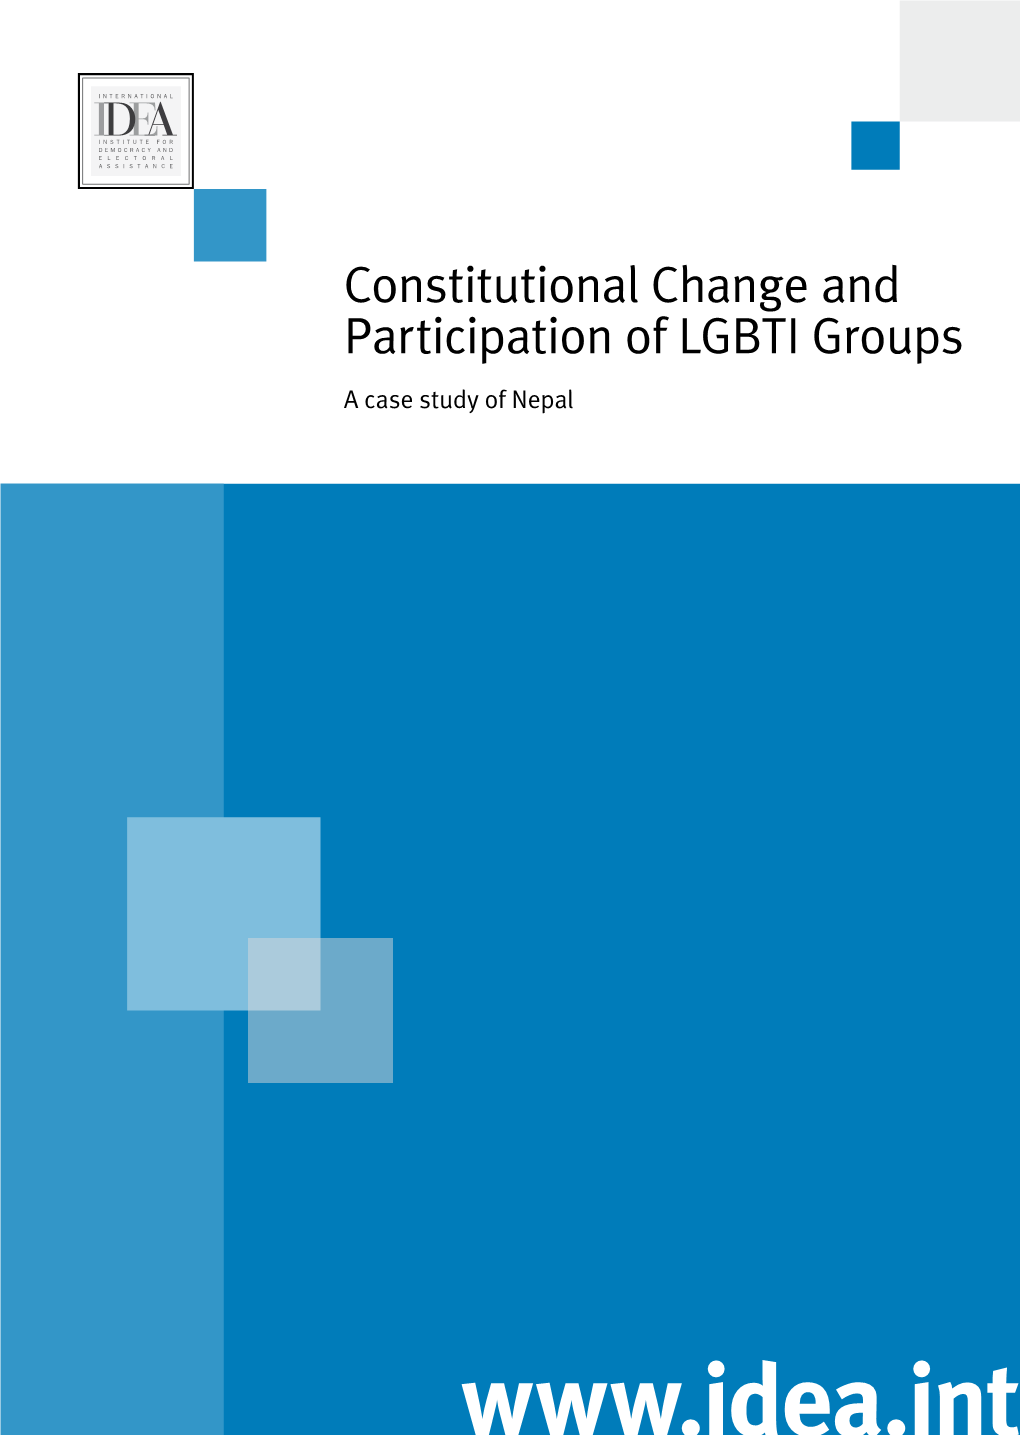 Constitutional Change and Participation of LGBTI Groups a Case Study of Nepal